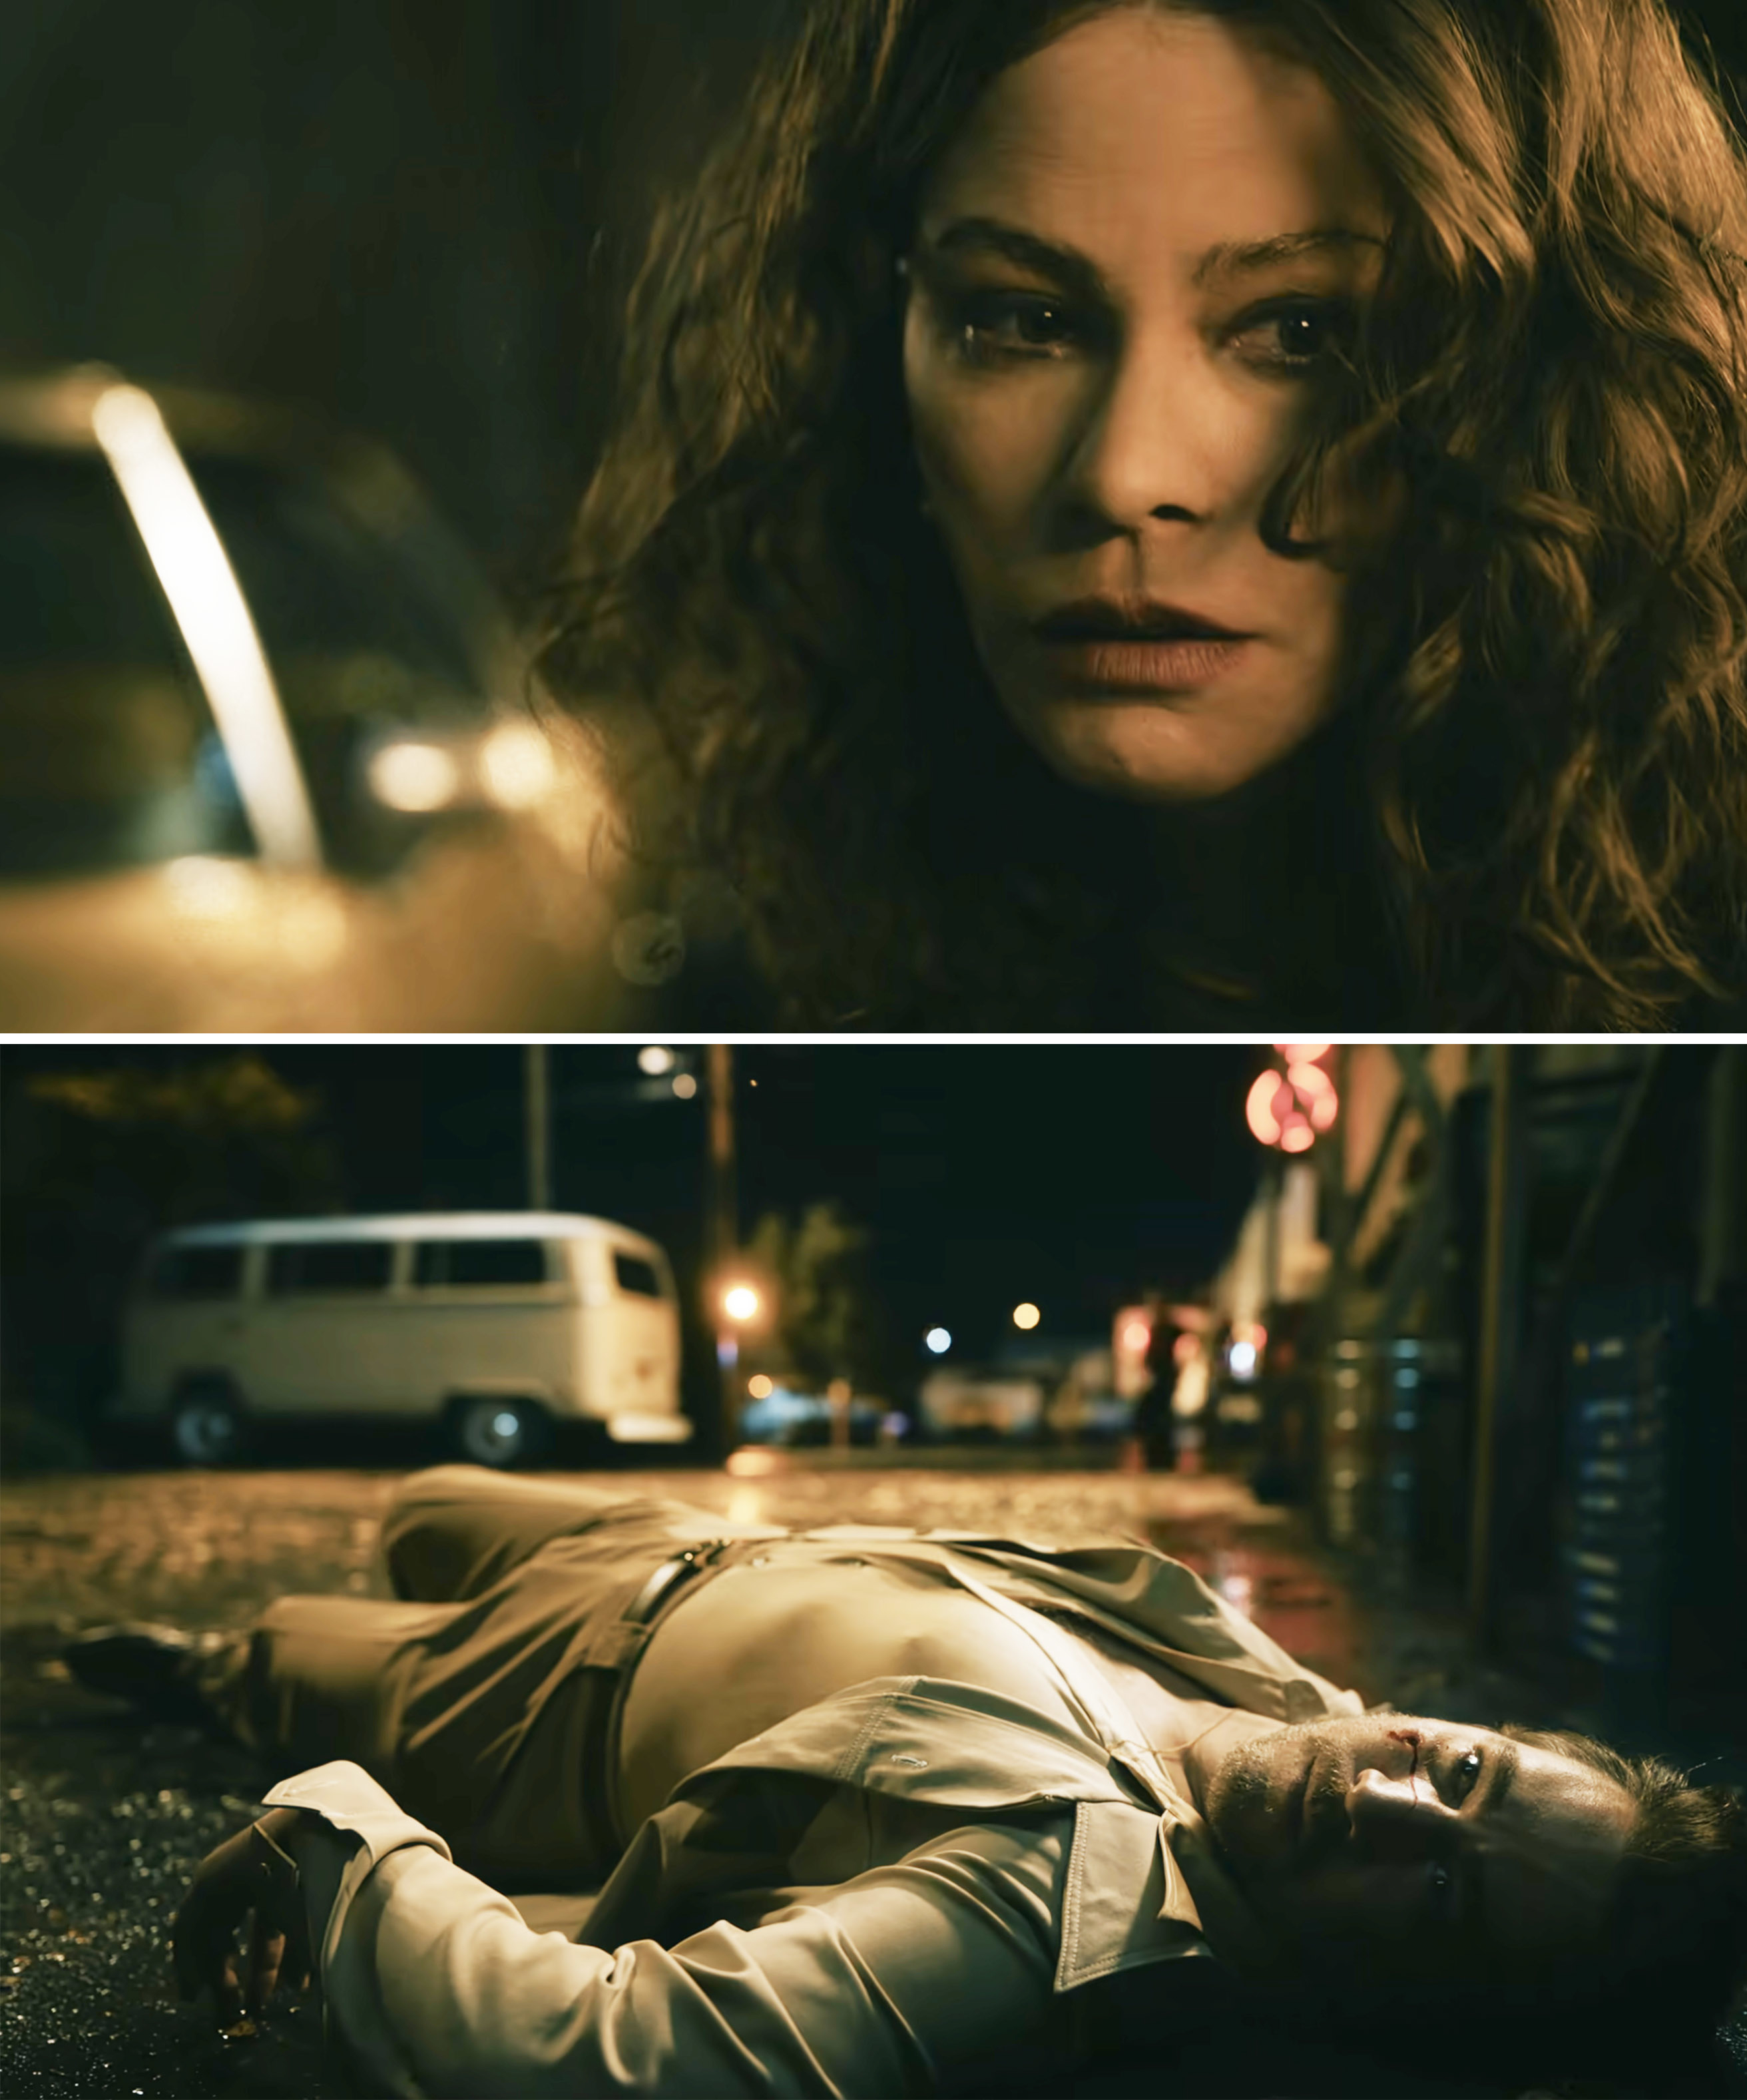 Alberto lying dead in the street in a scene from &quot;Griselda&quot;